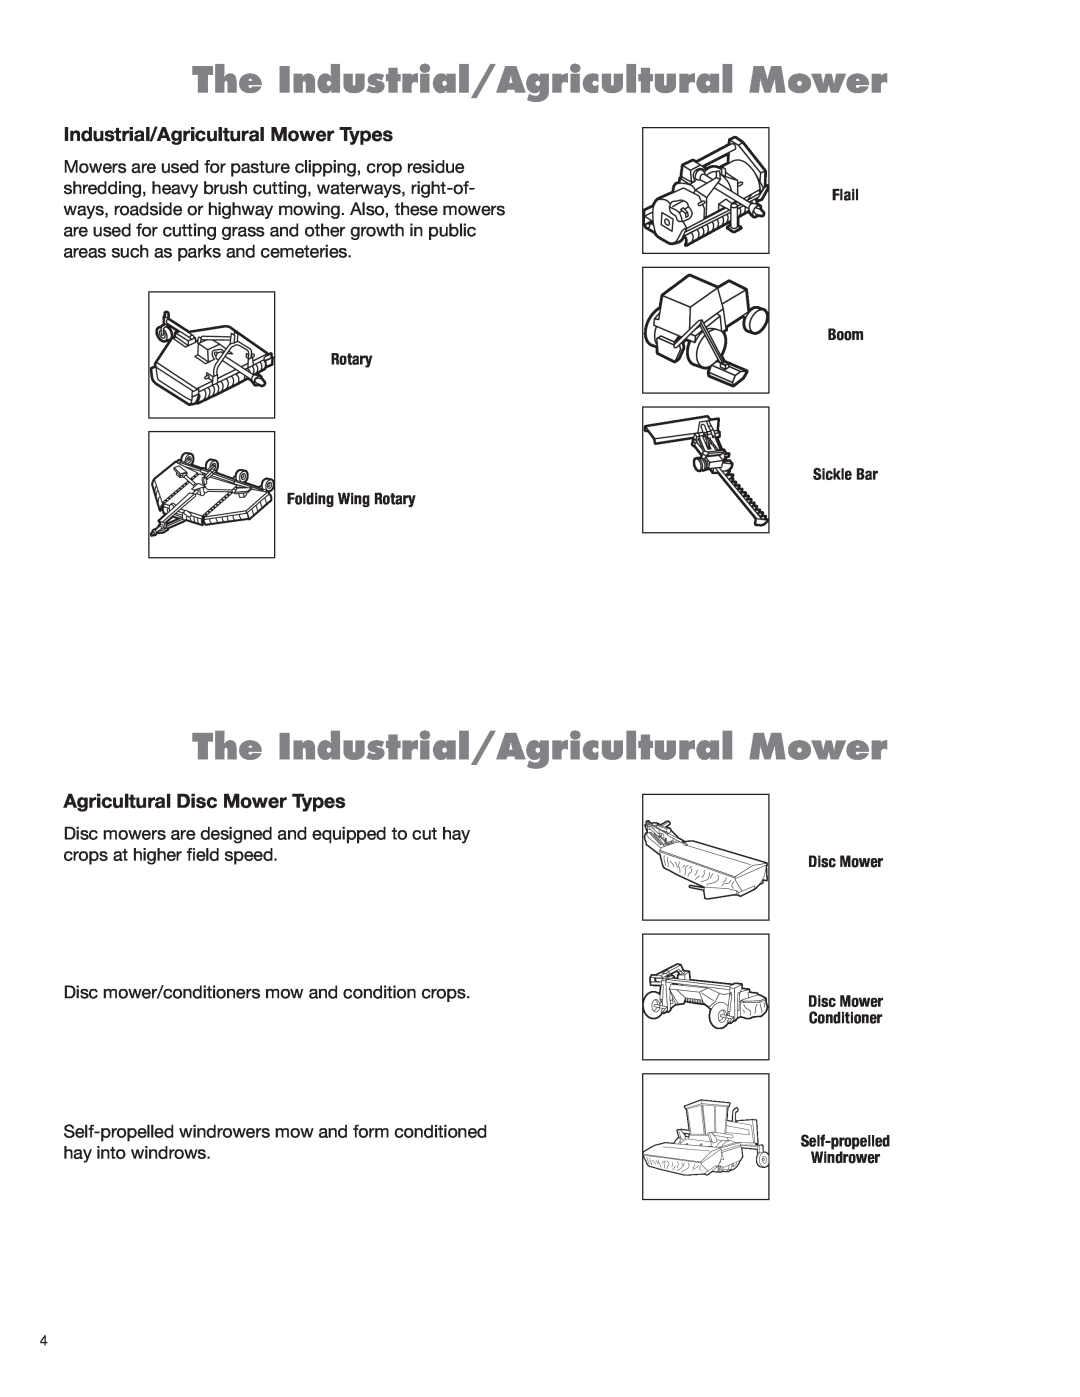 Rhino Mounts DB150 The Industrial/Agricultural Mower, Industrial/Agricultural Mower Types, Agricultural Disc Mower Types 